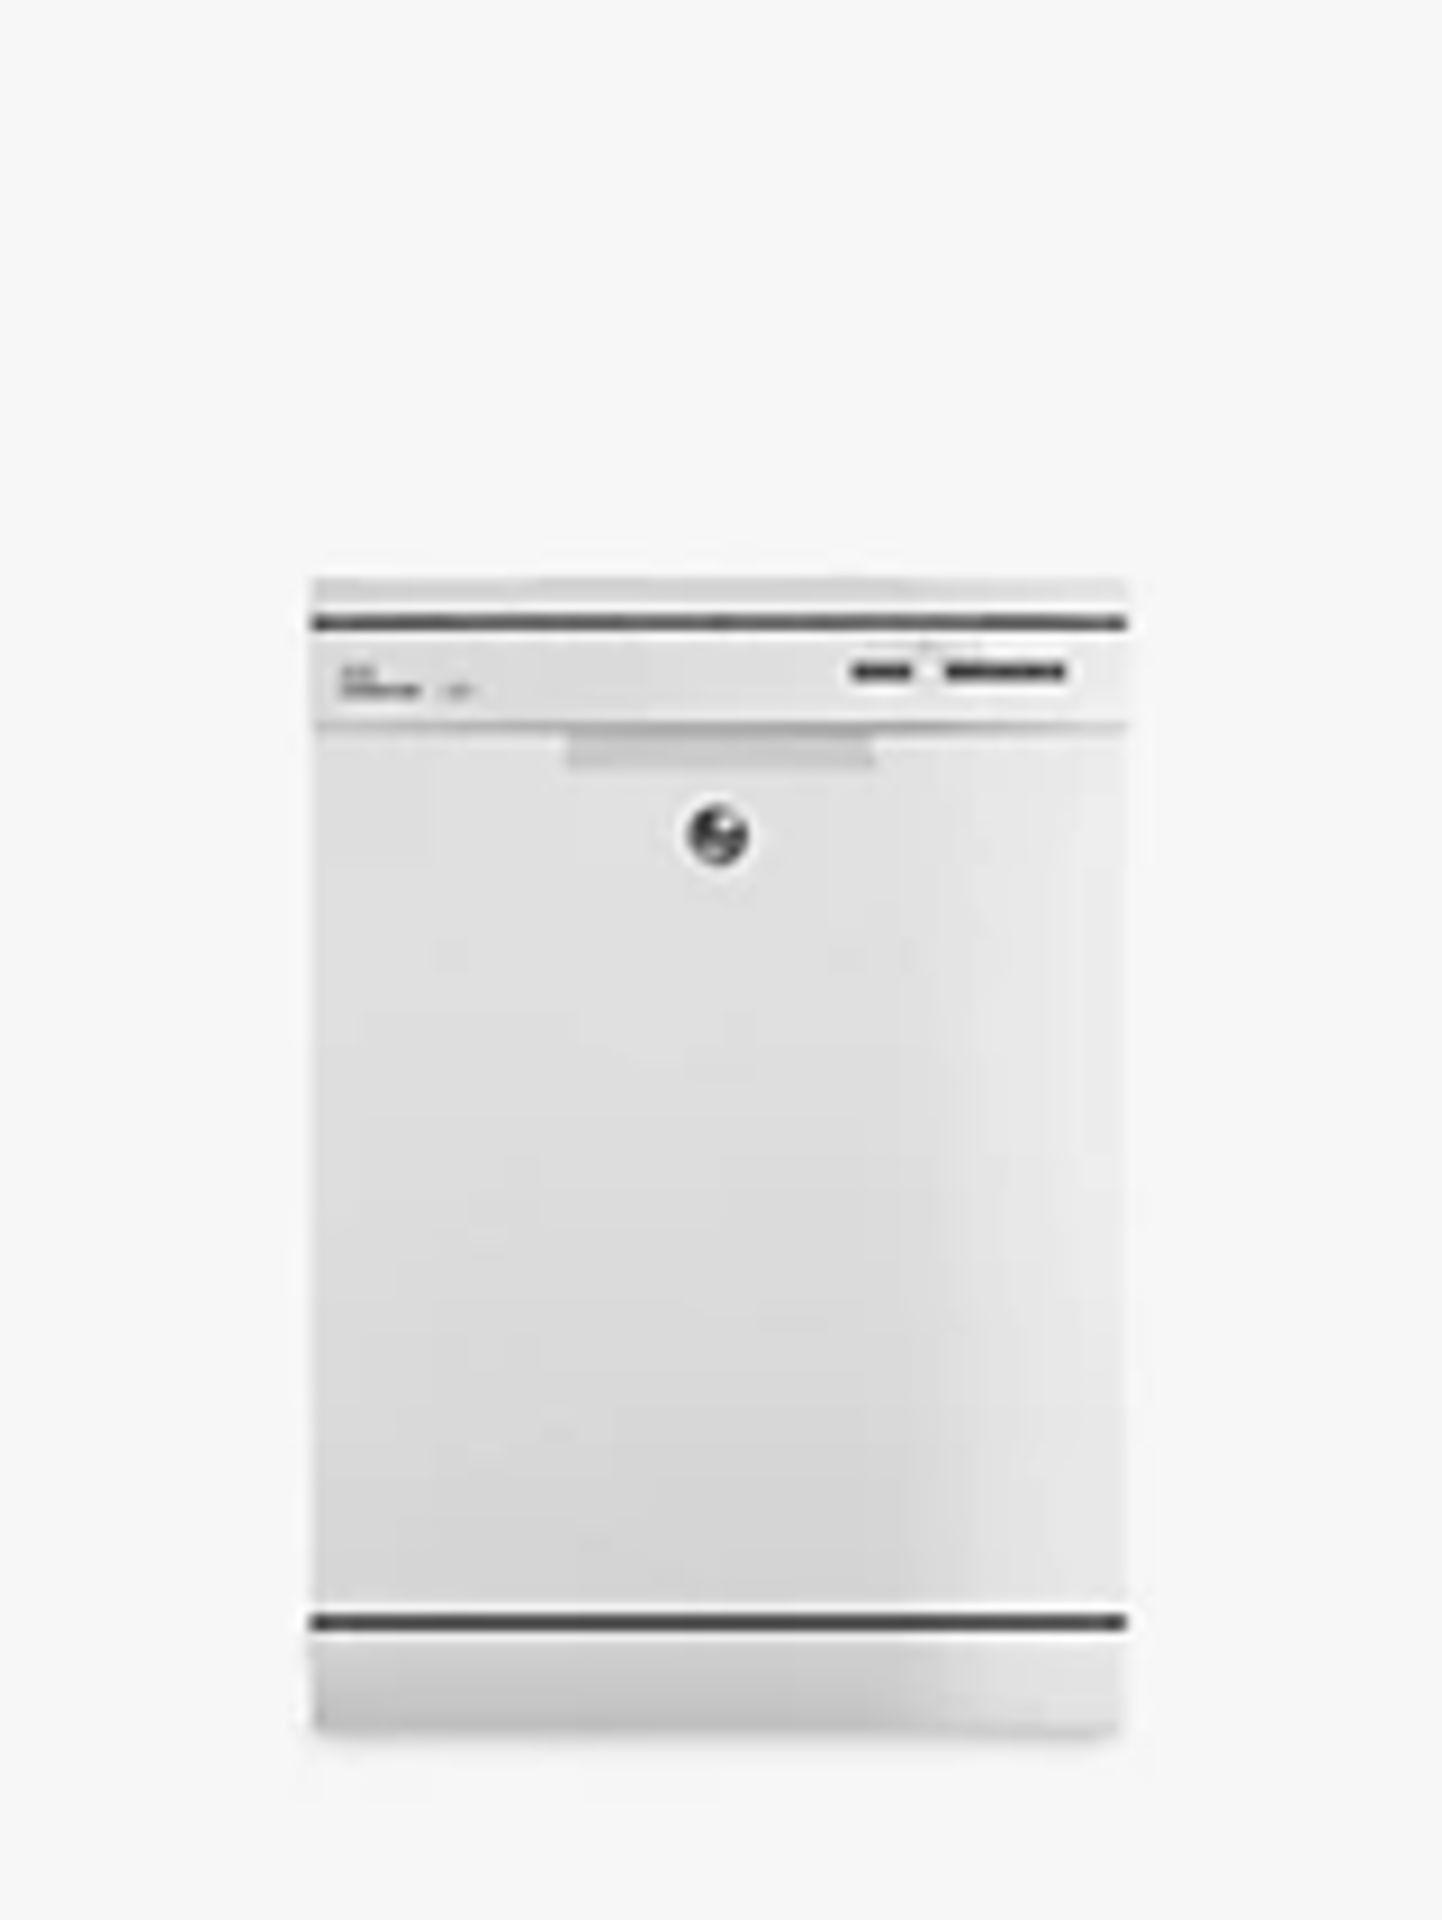 Grade A Hoover HDPN 1L390OW-80 Freestanding Dishwasher in White - RRP: £299 - Image 3 of 3